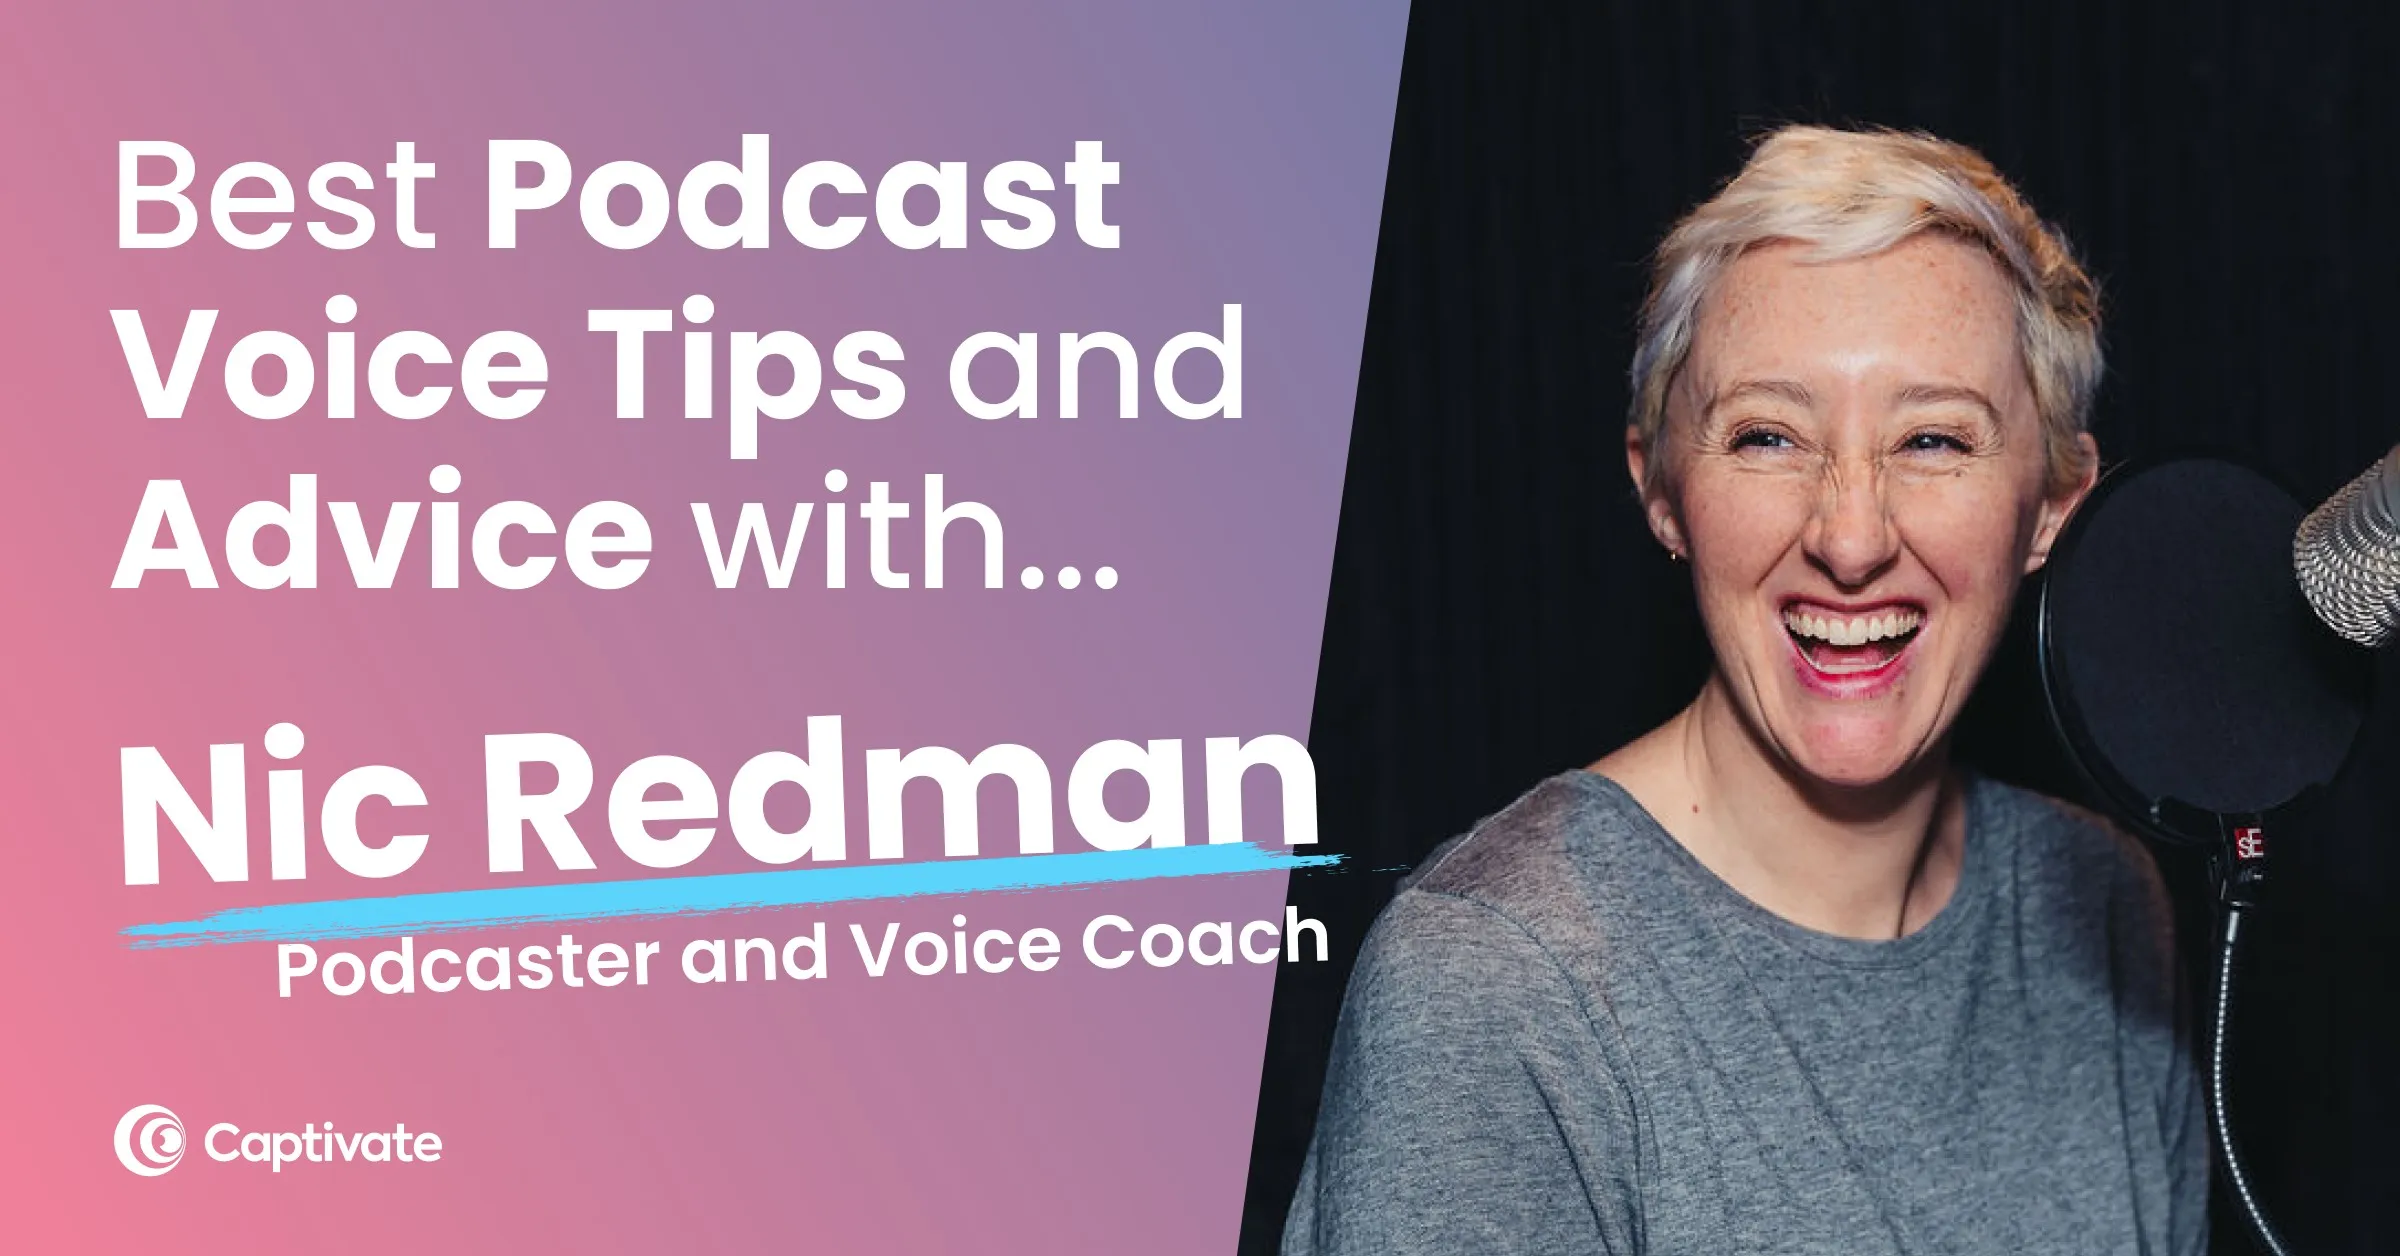 Blog featured image with voice coach and podcaster Nic Redman